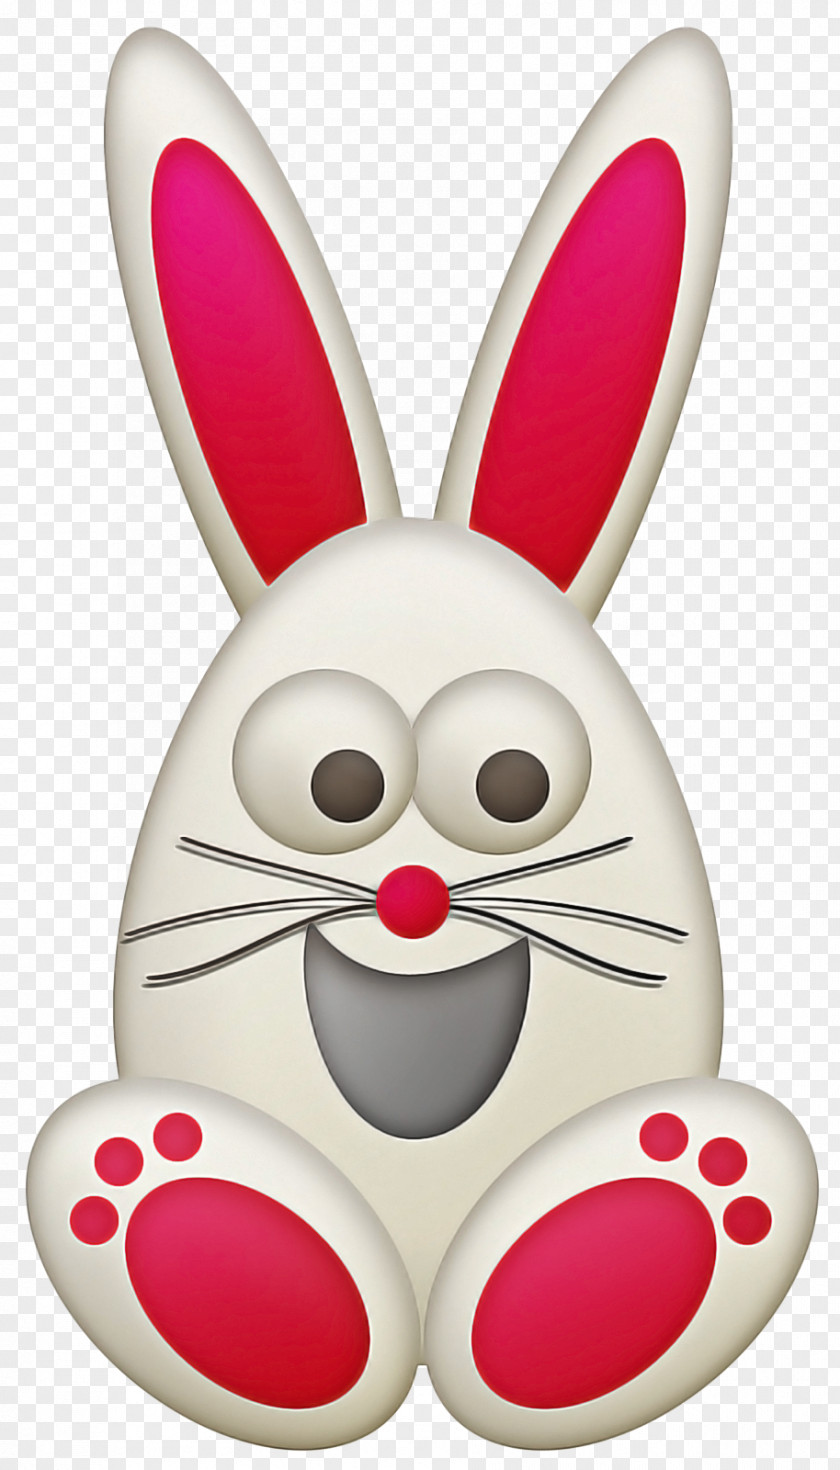 Paw Heart Easter Egg Cartoon PNG